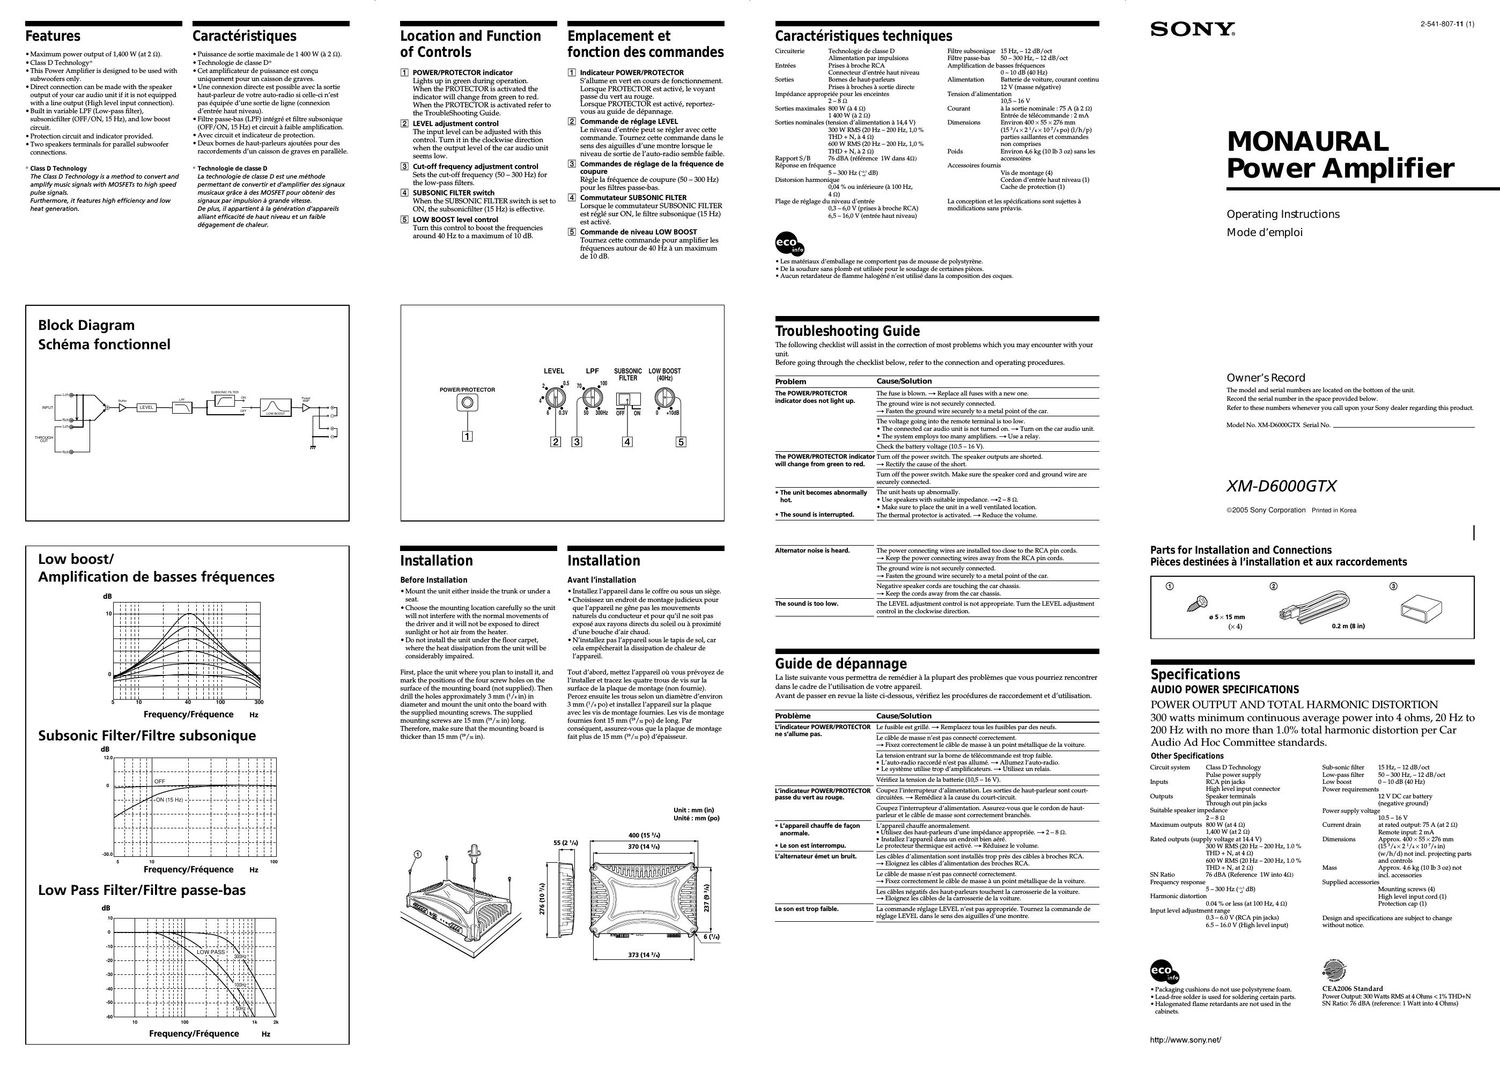 sony xmd 6000 gtx owners manual